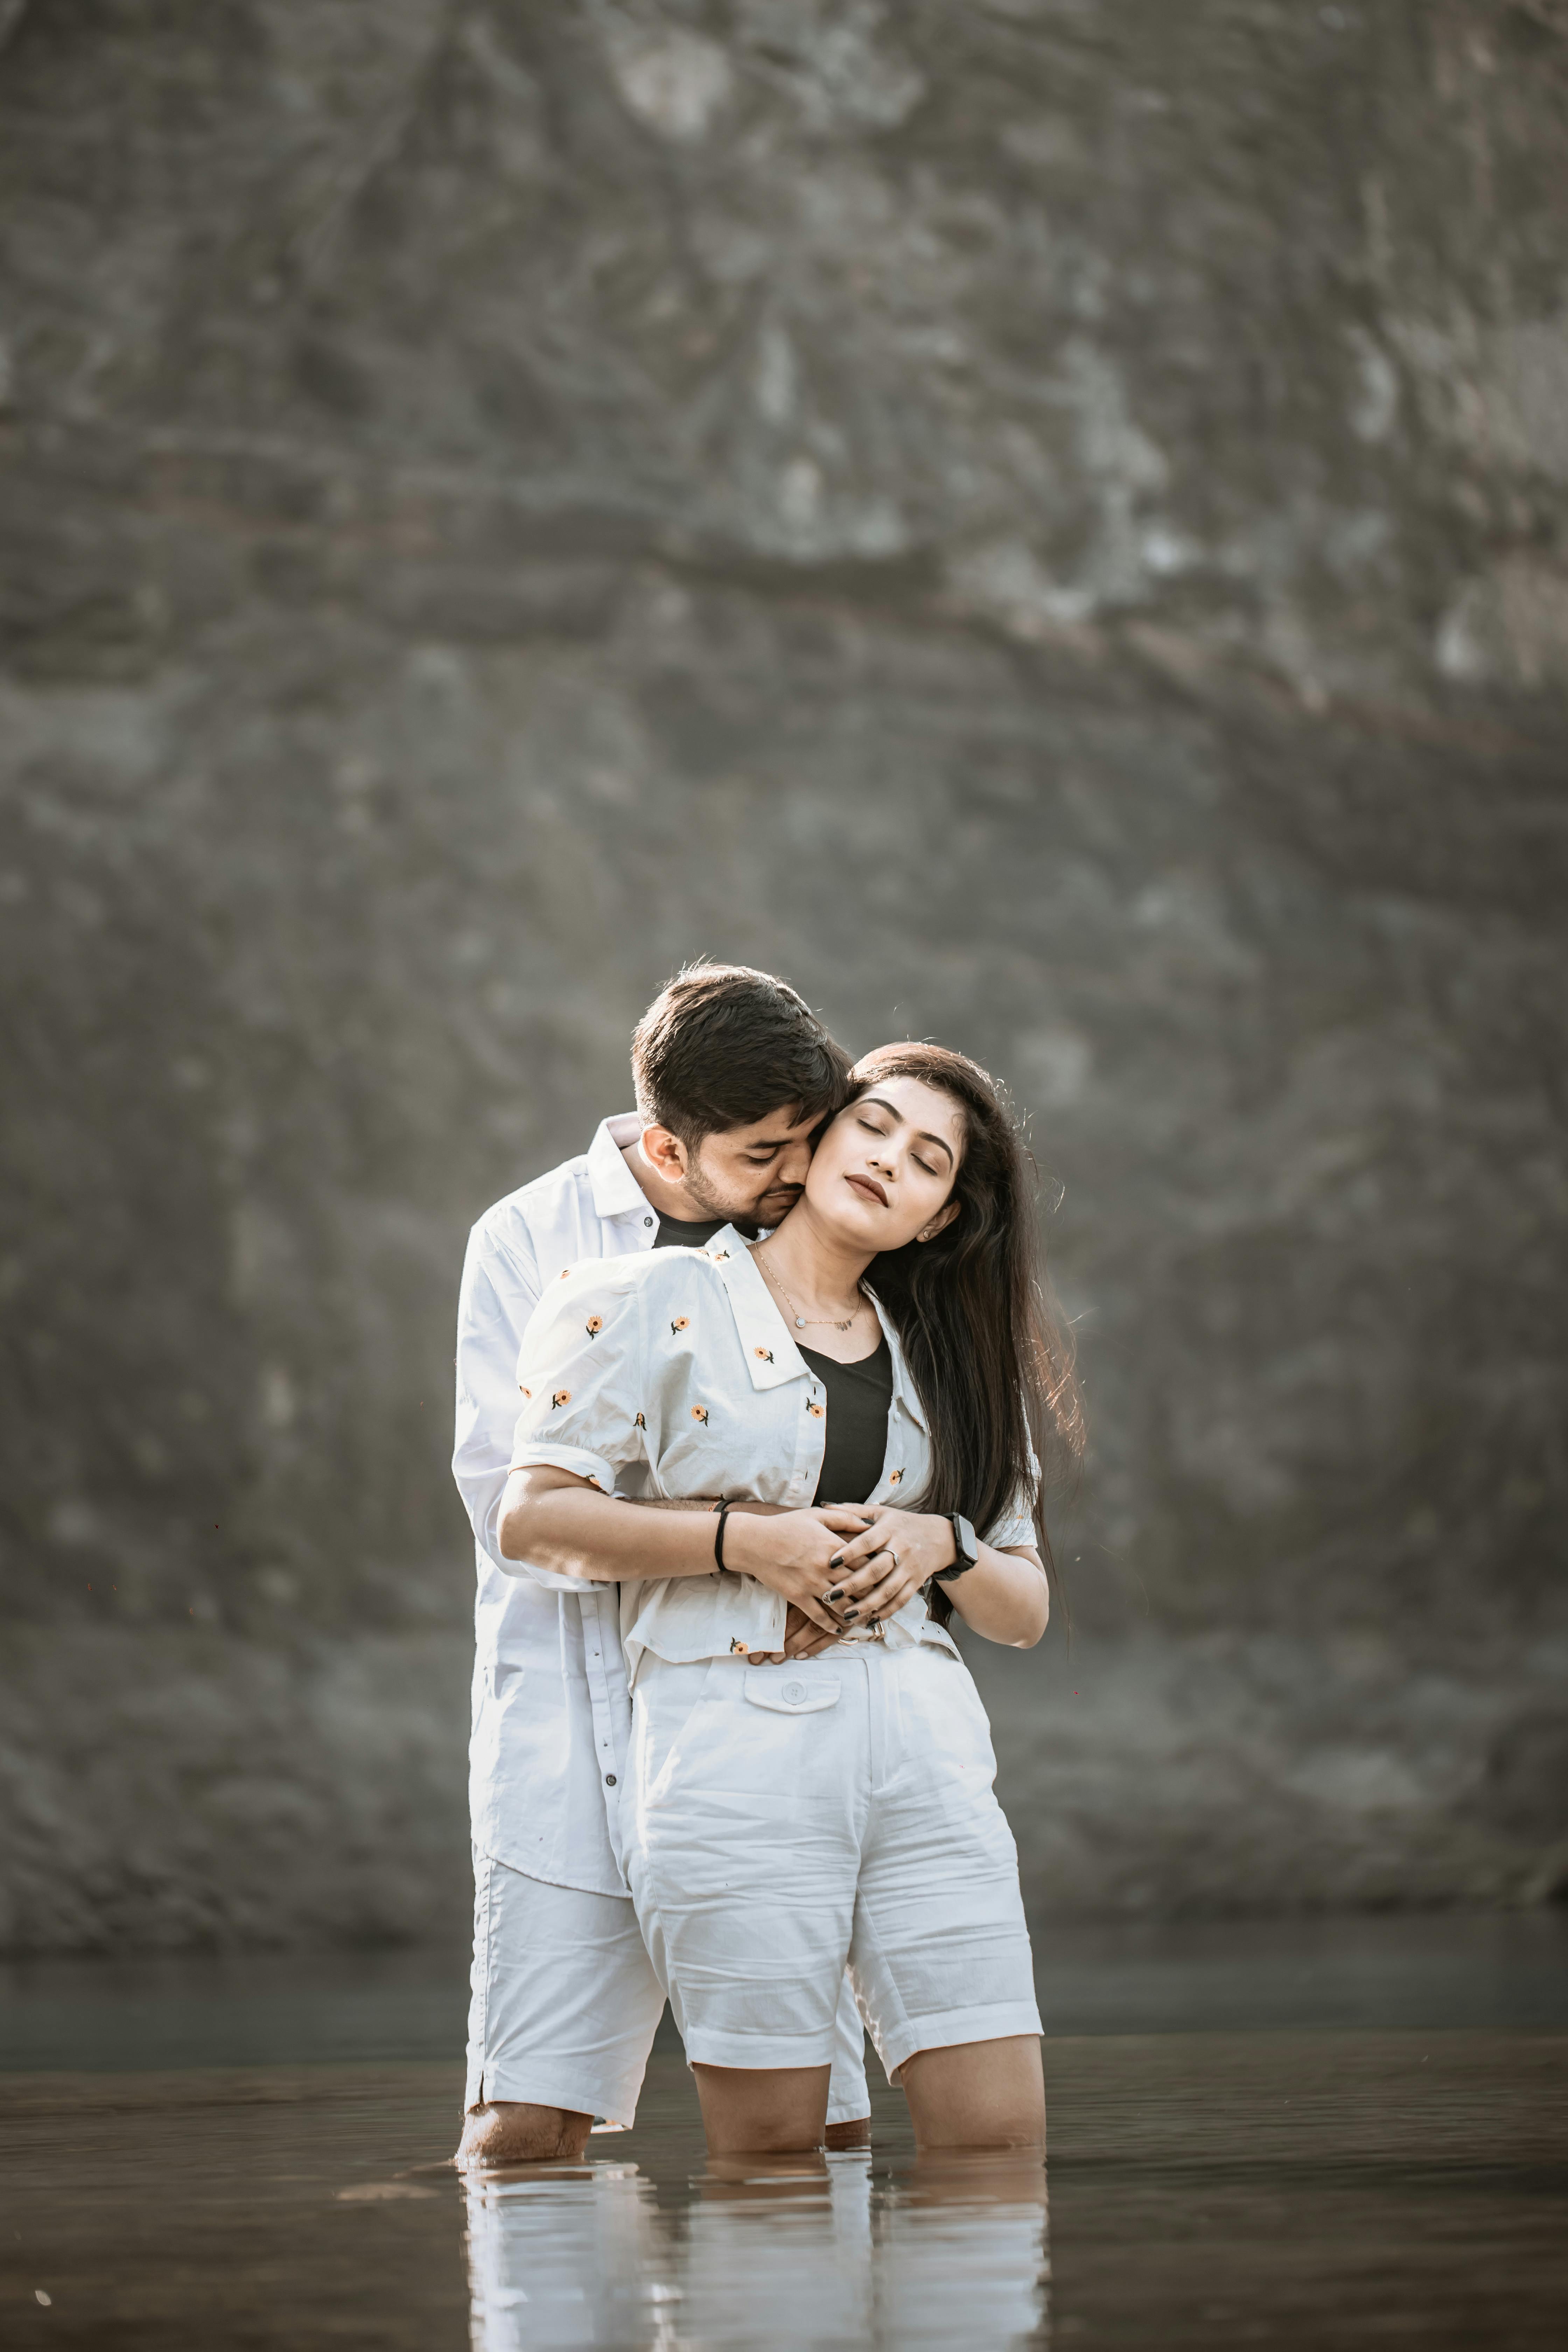 Picturesque Outdoor Couple Portraits We Love! | Couple picture poses, Pre  wedding photoshoot outdoor, Wedding couple poses photography